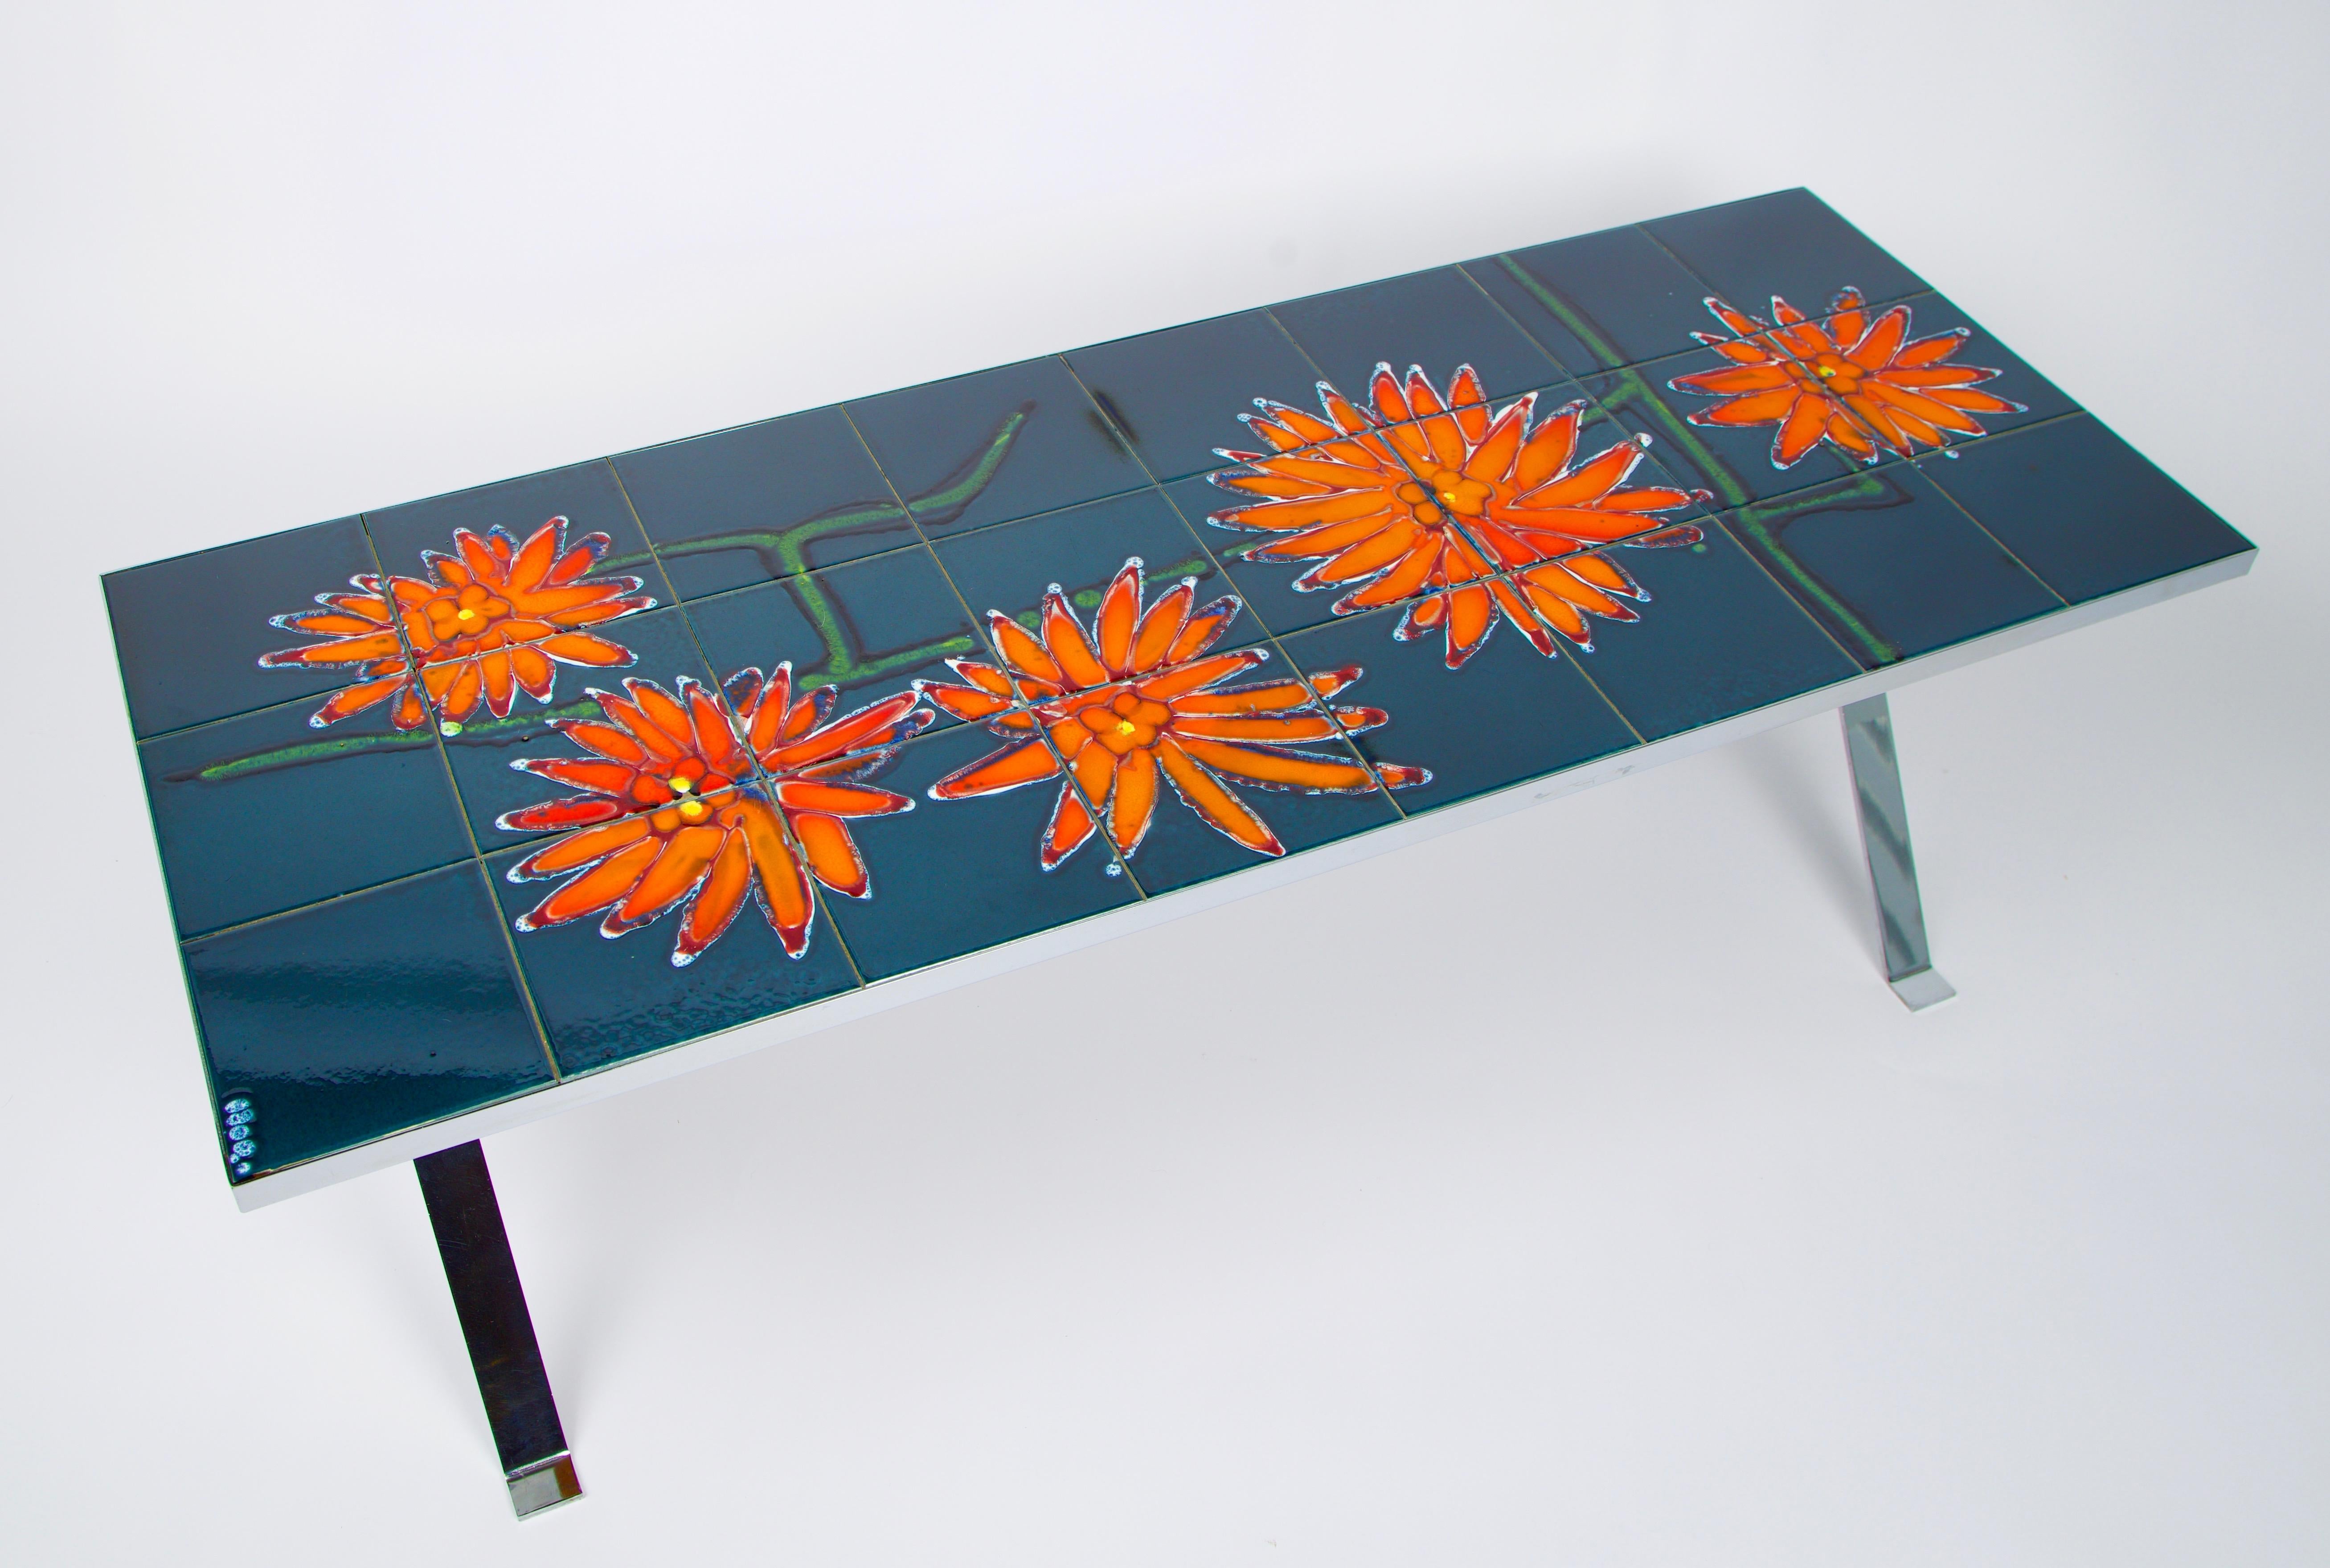 This tile top table is made from hand painted blue ceramic tile with a bright orange abstract floral motif. The tiles rest on a chrome plated base which is supported by a teak stretcher.  It was manufactured and signed by Adri Belgique,  a design